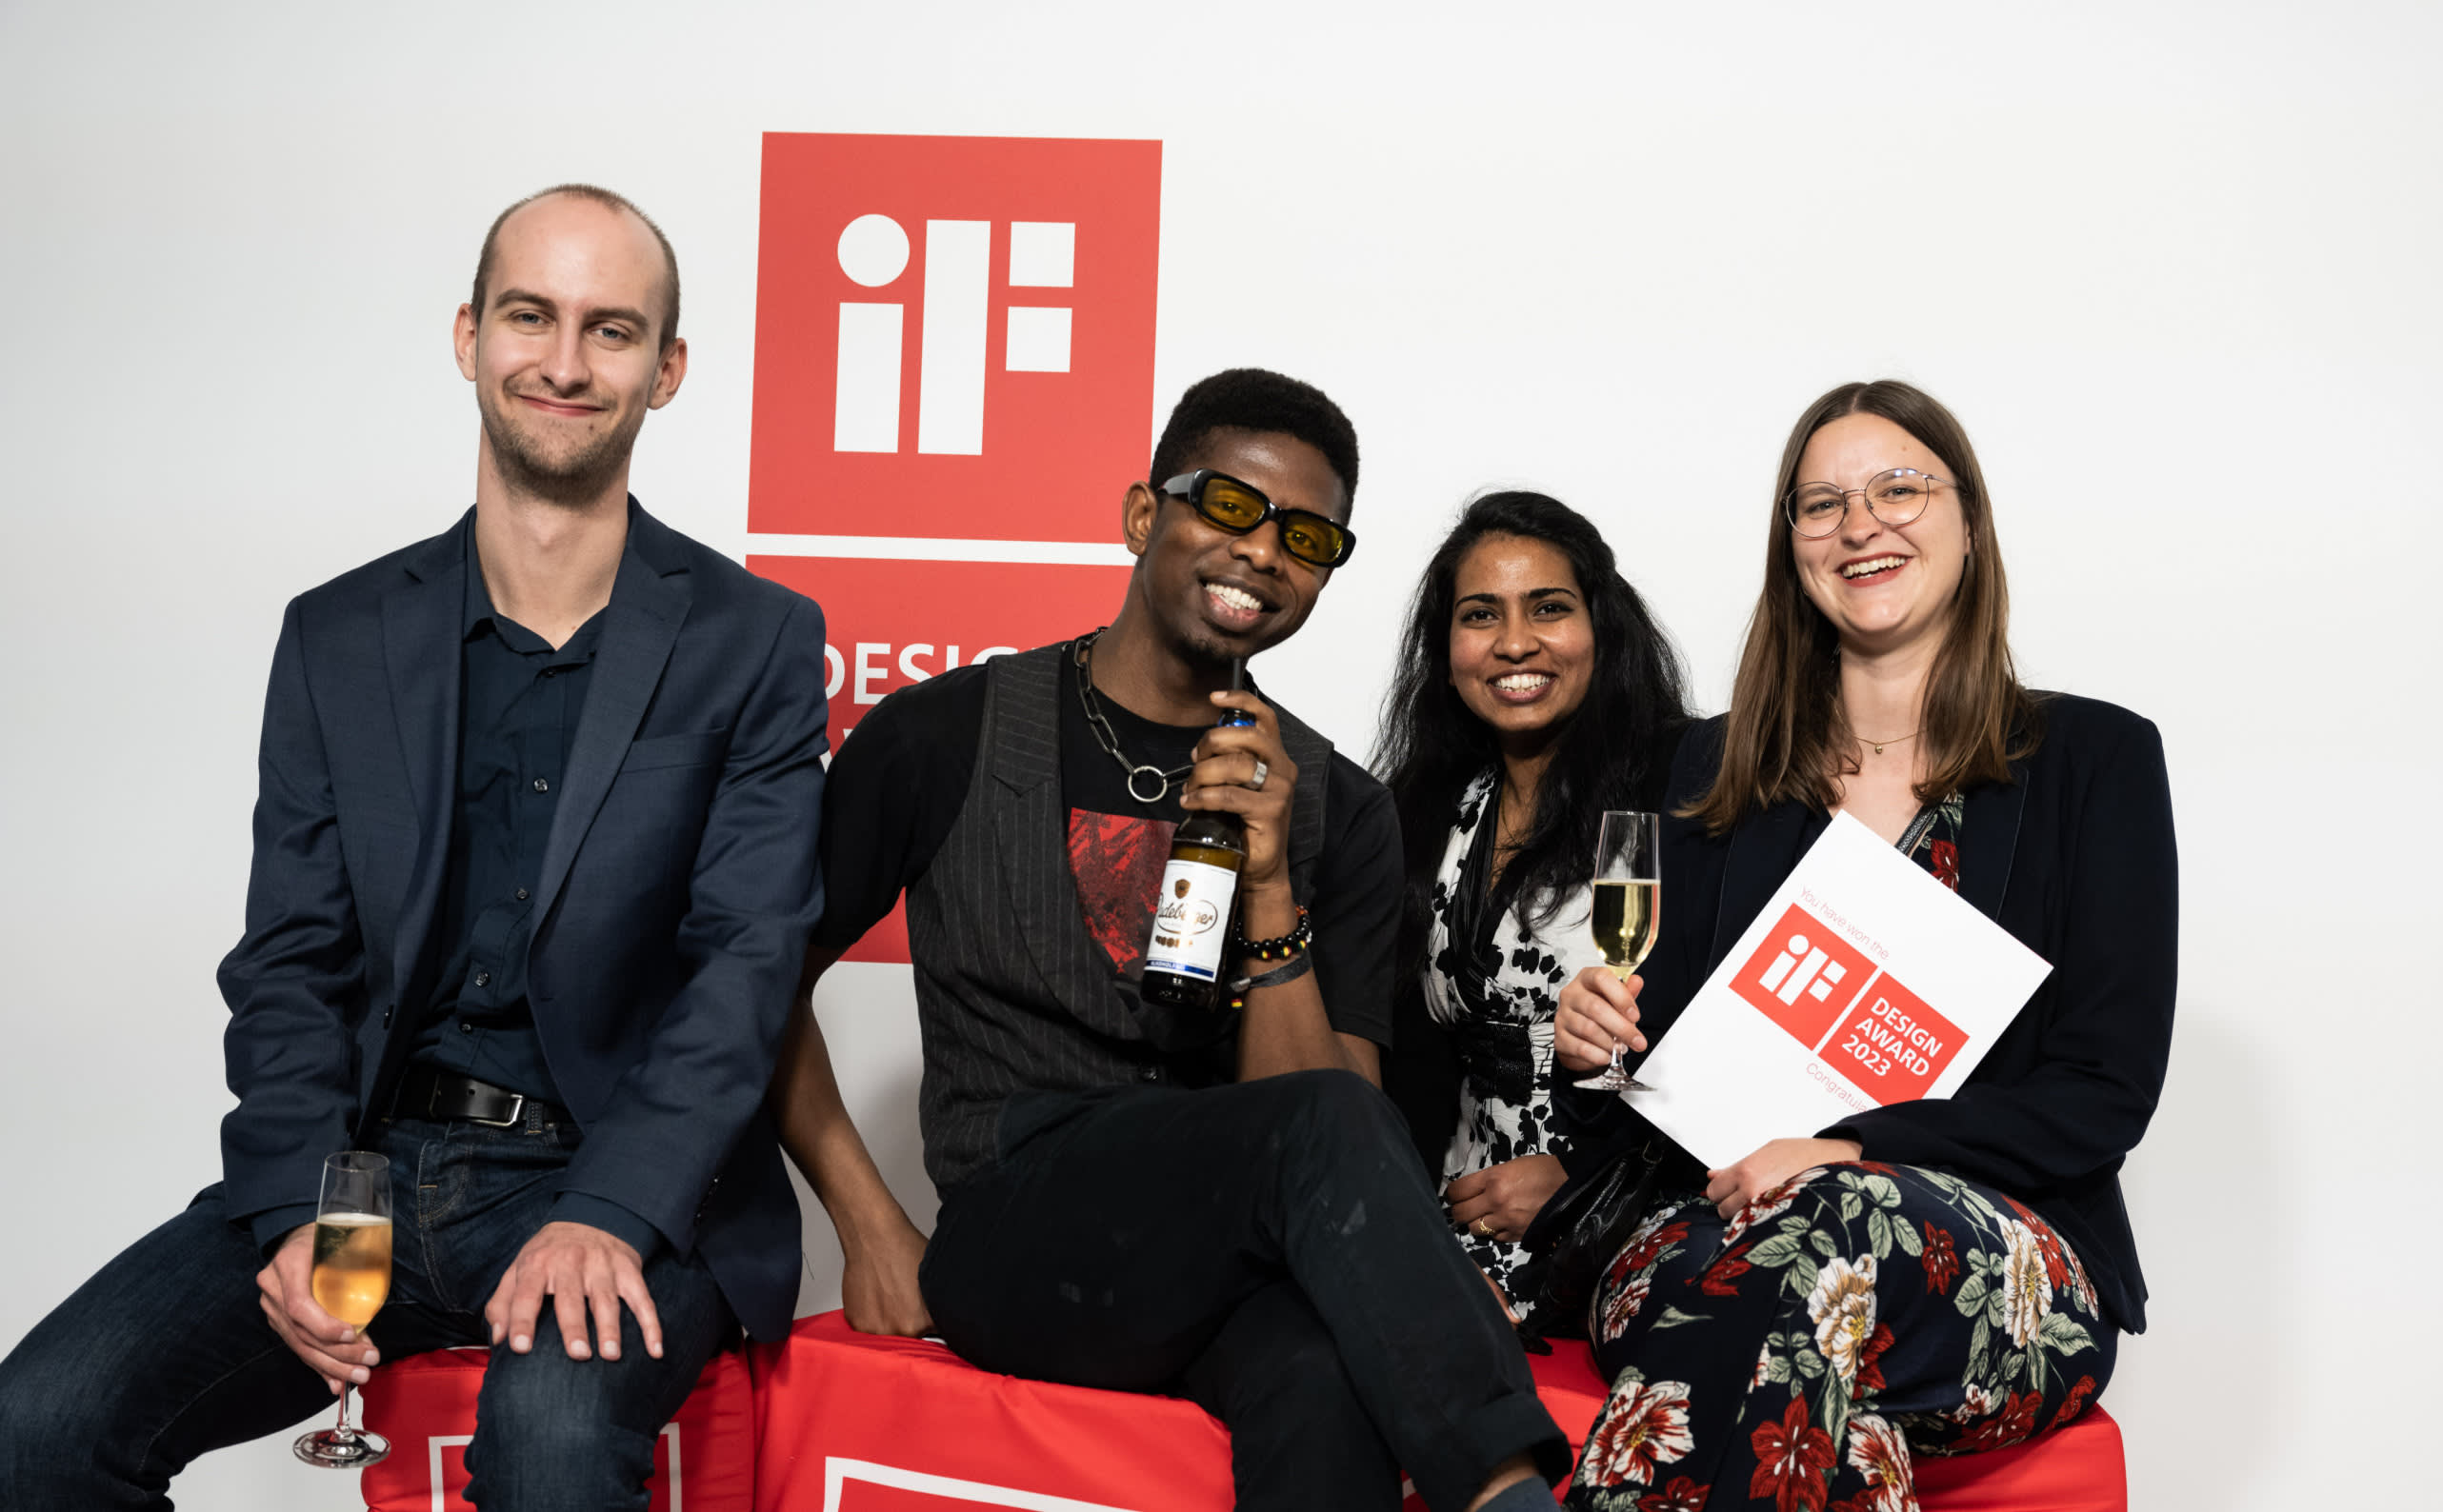 iF Design Award 2023 winners celebrating at the awards ceremony in Berlin - register now for the iF Design Award 2024!